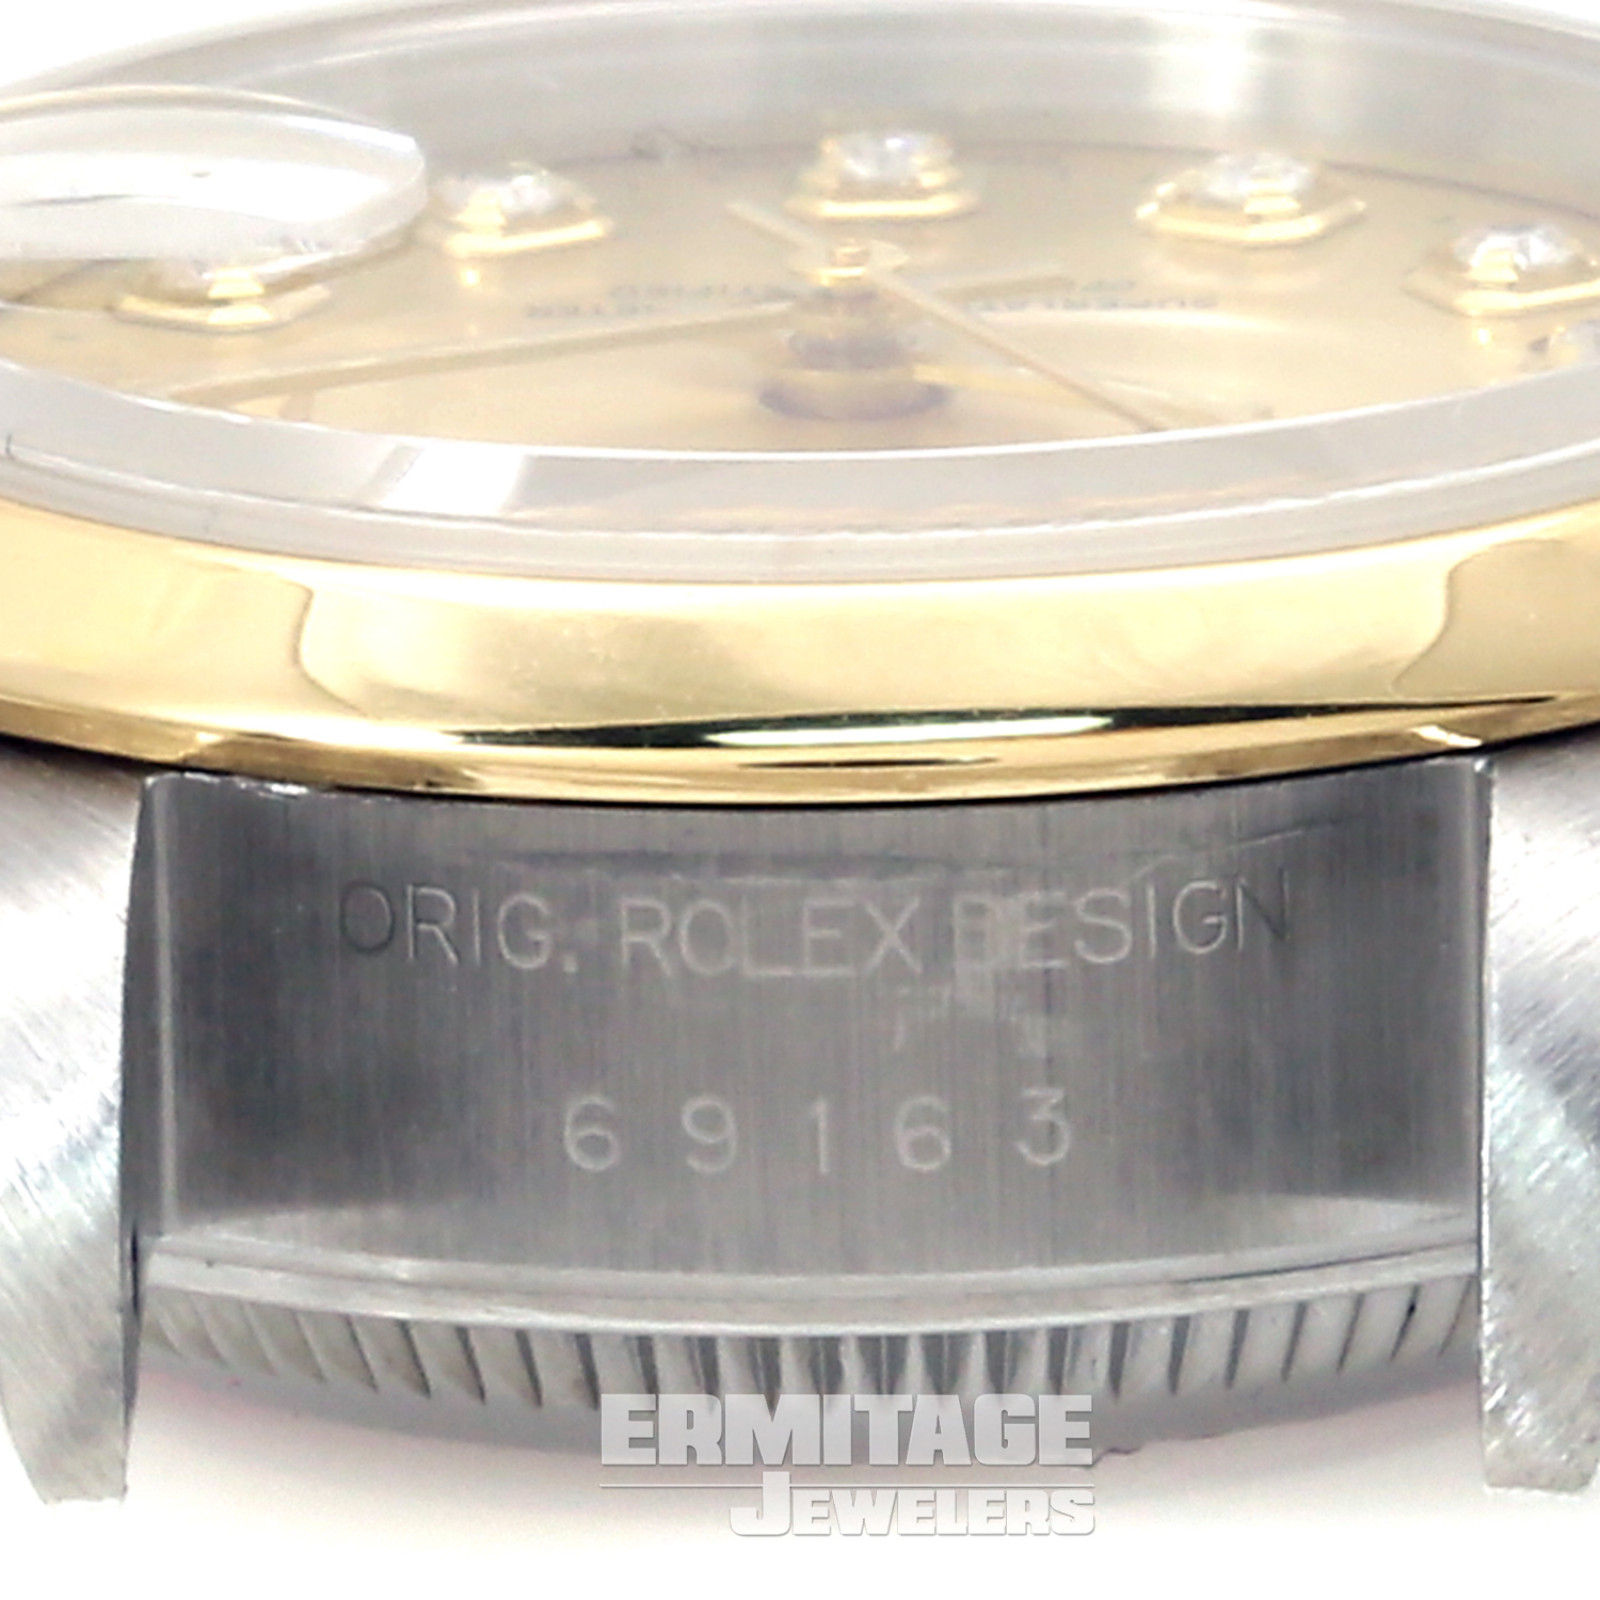 Rolex Datejust 69163 with Champagne Dial